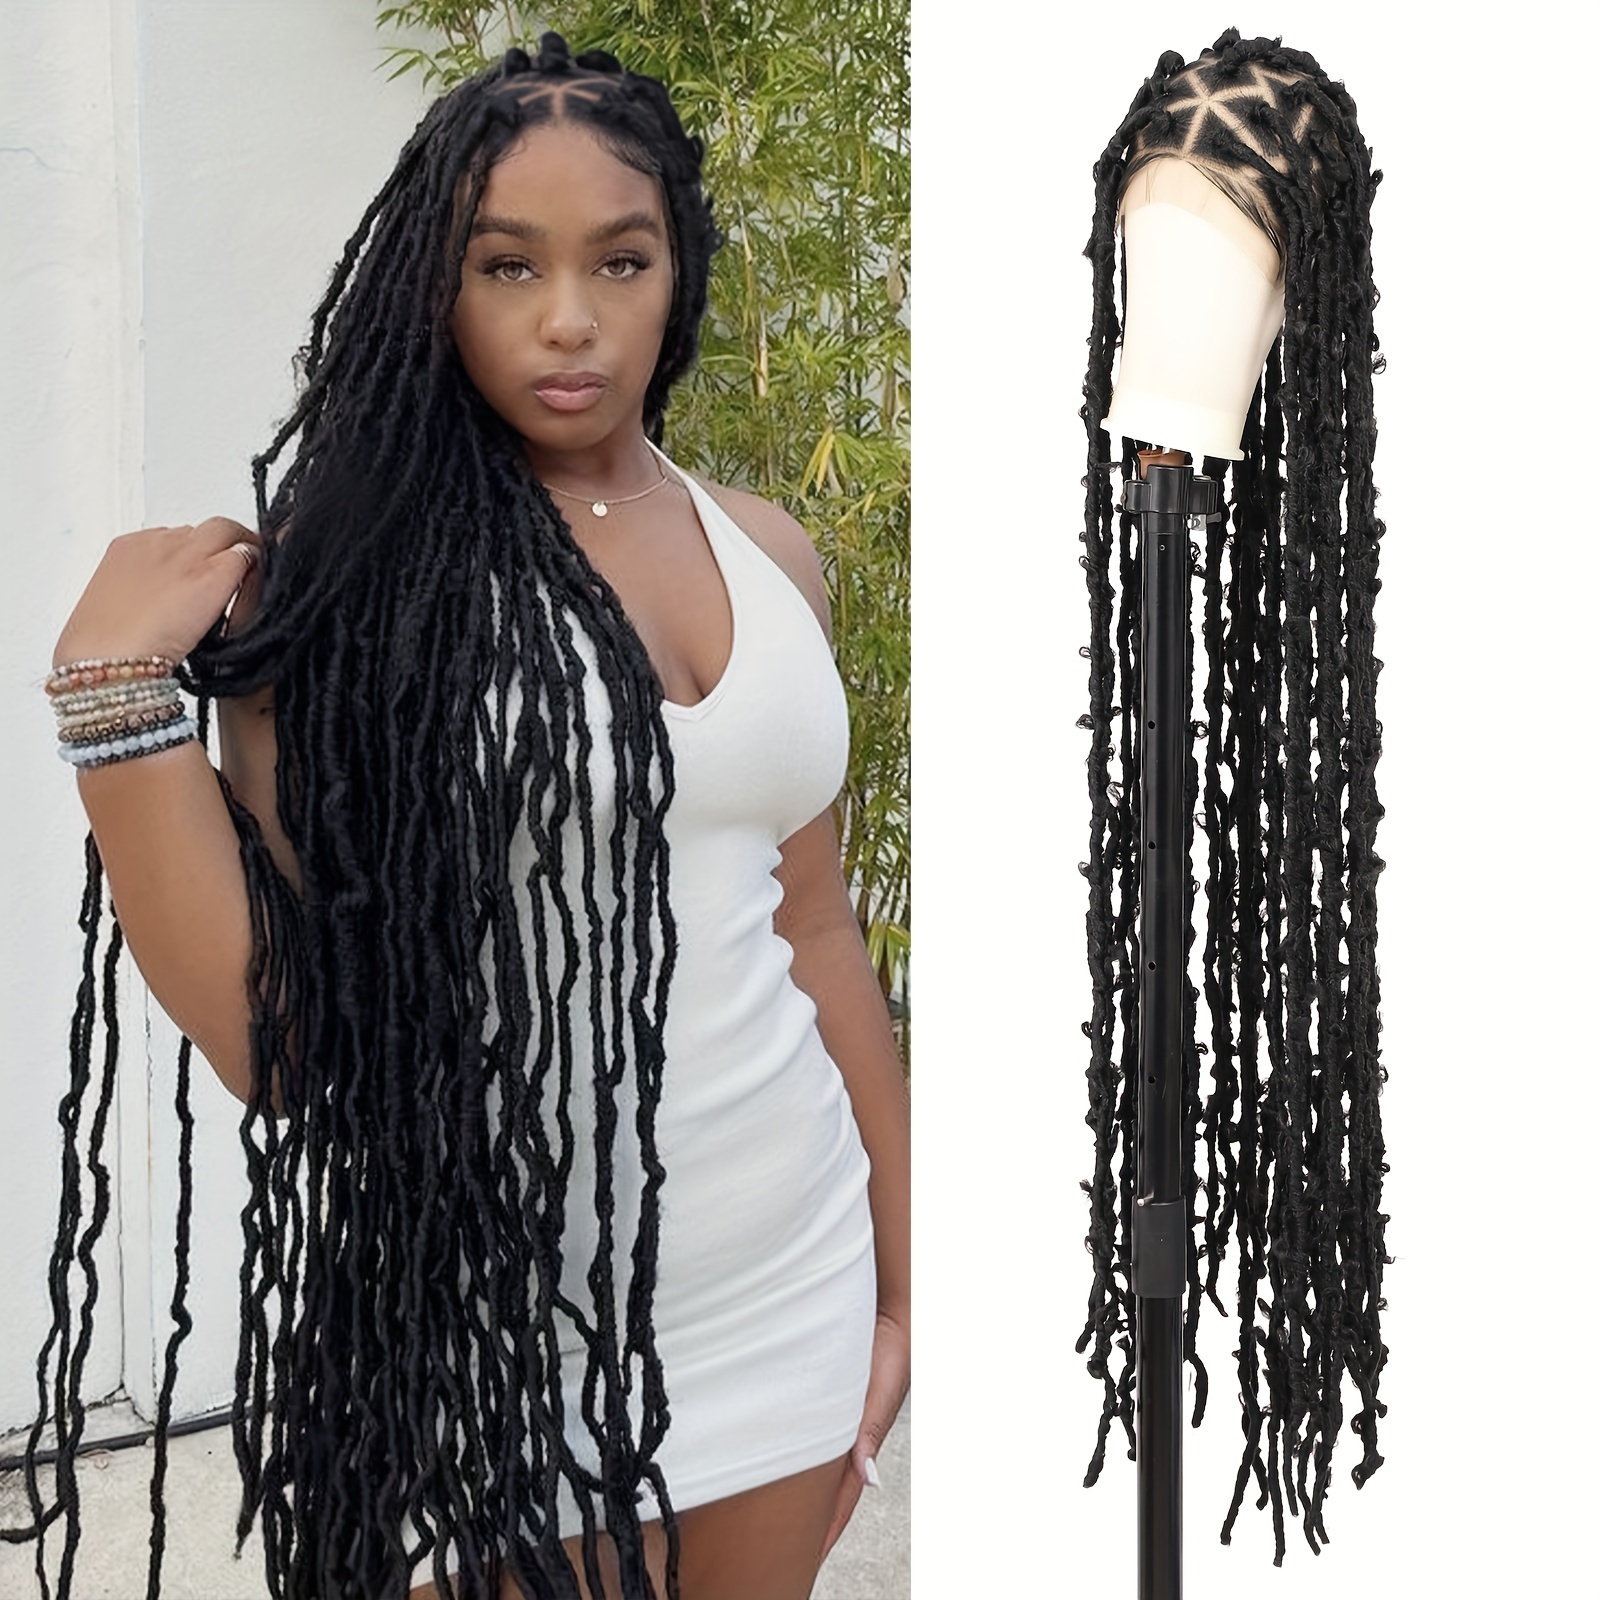 Fulllace Afro Braided Wig ,lace Front Wig Cornrow Wig Faux Locs Wig.front  Lace Braided Wig.wigs for Black Women 